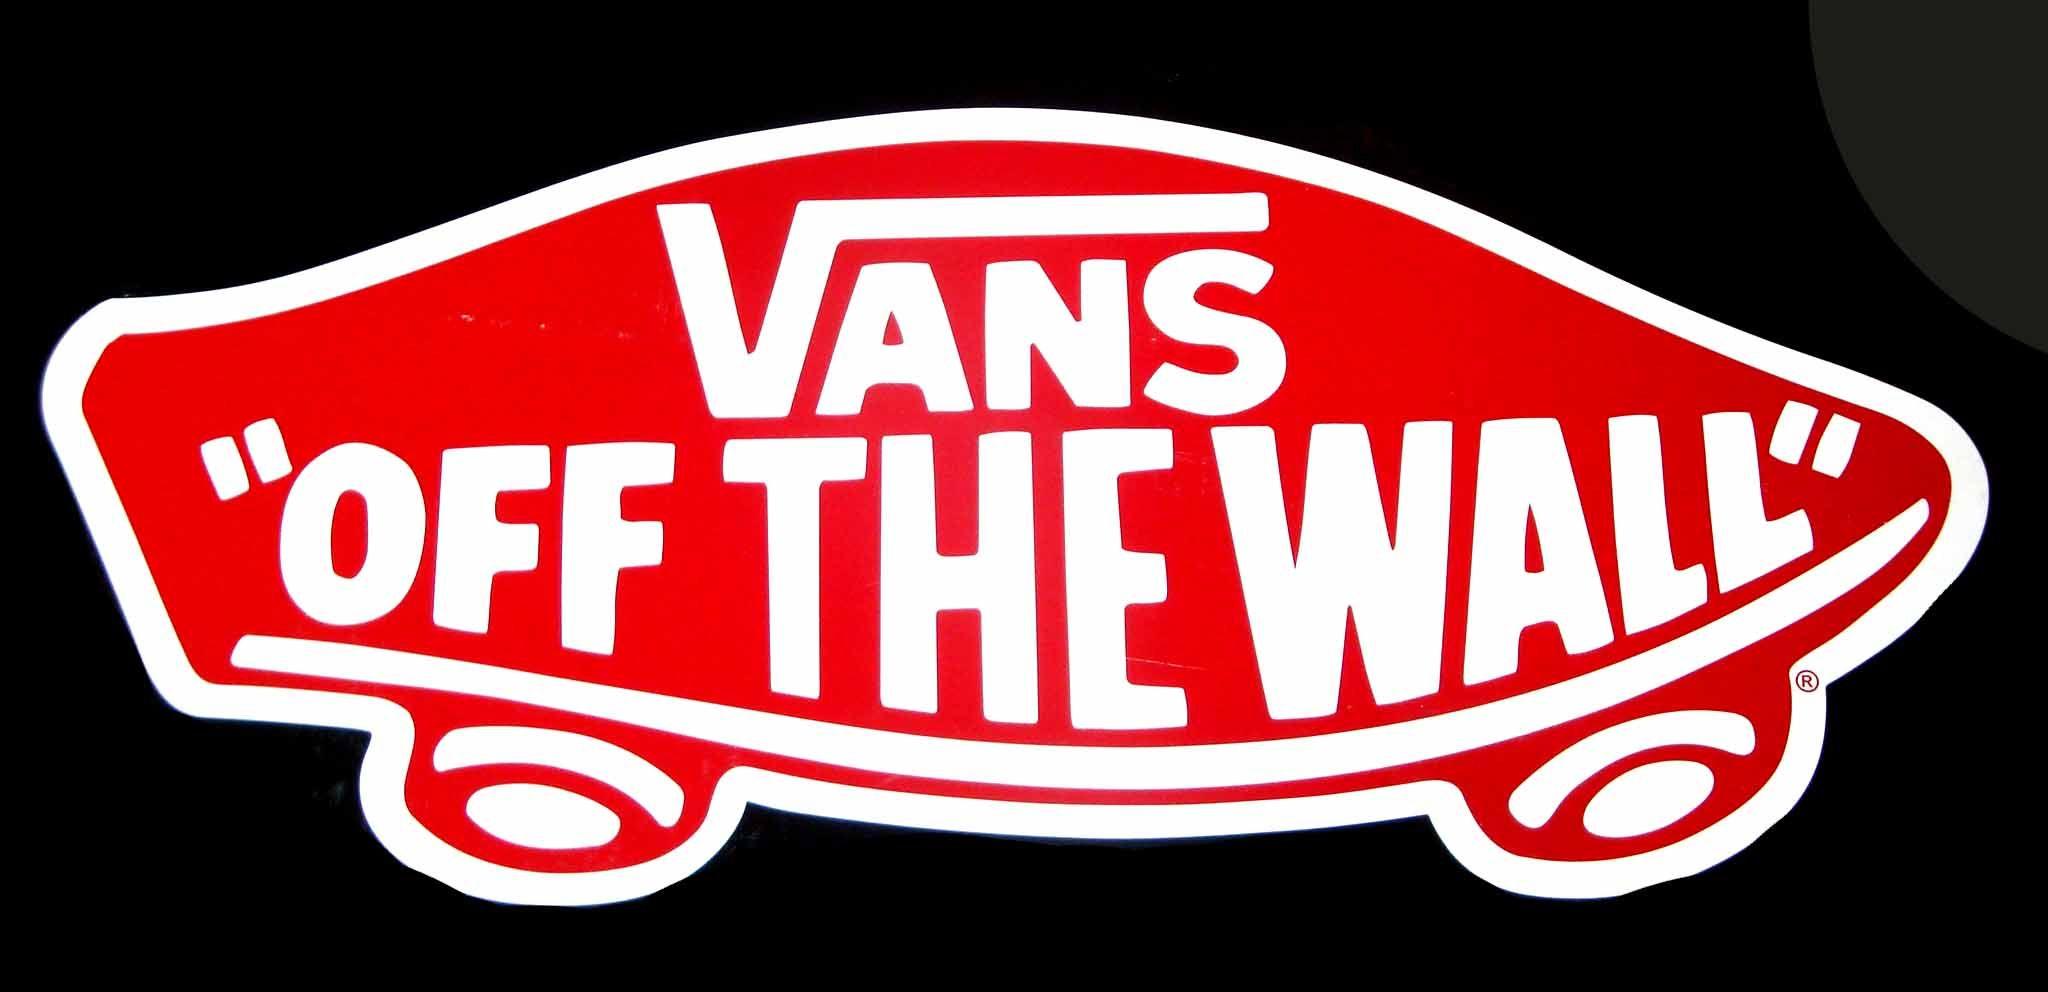 Vans Wall Logo - Vans #logo @Vans Fashion Off The Wall Off The Wall | Whatever floats ...